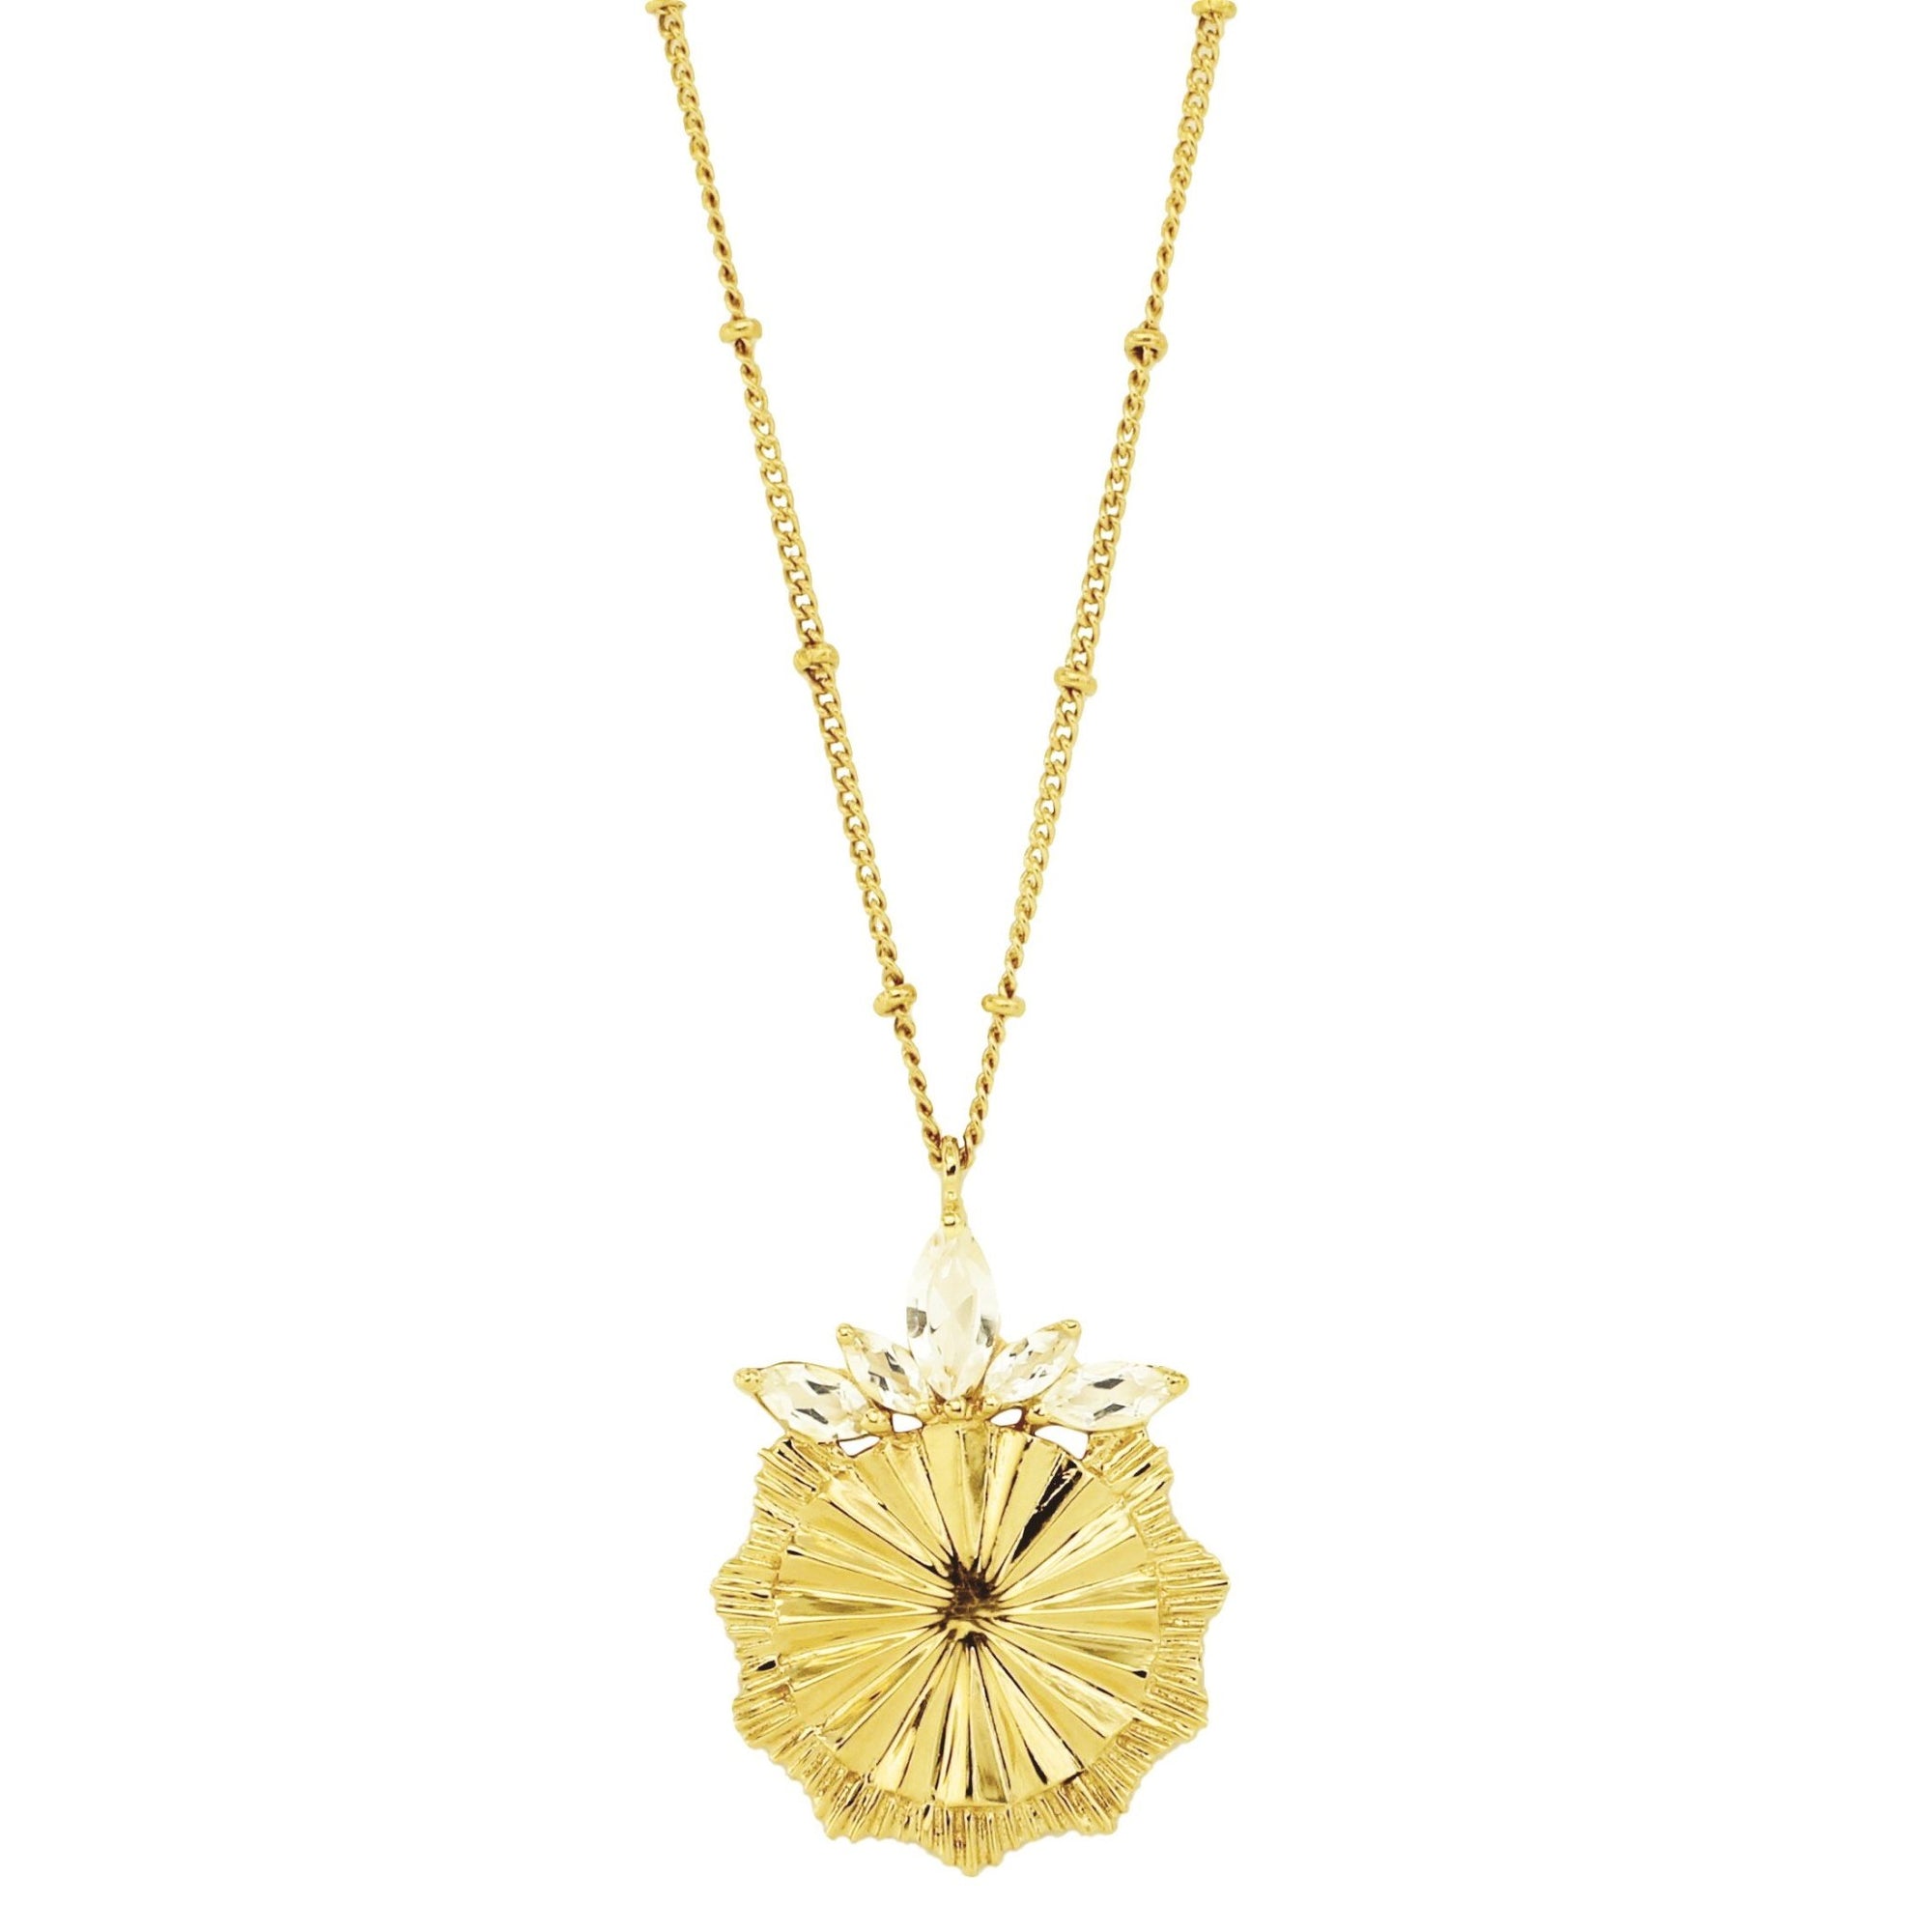 BELIEVE SOLEIL PENDANT NECKLACE - WHITE TOPAZ & GOLD - SO PRETTY CARA COTTER